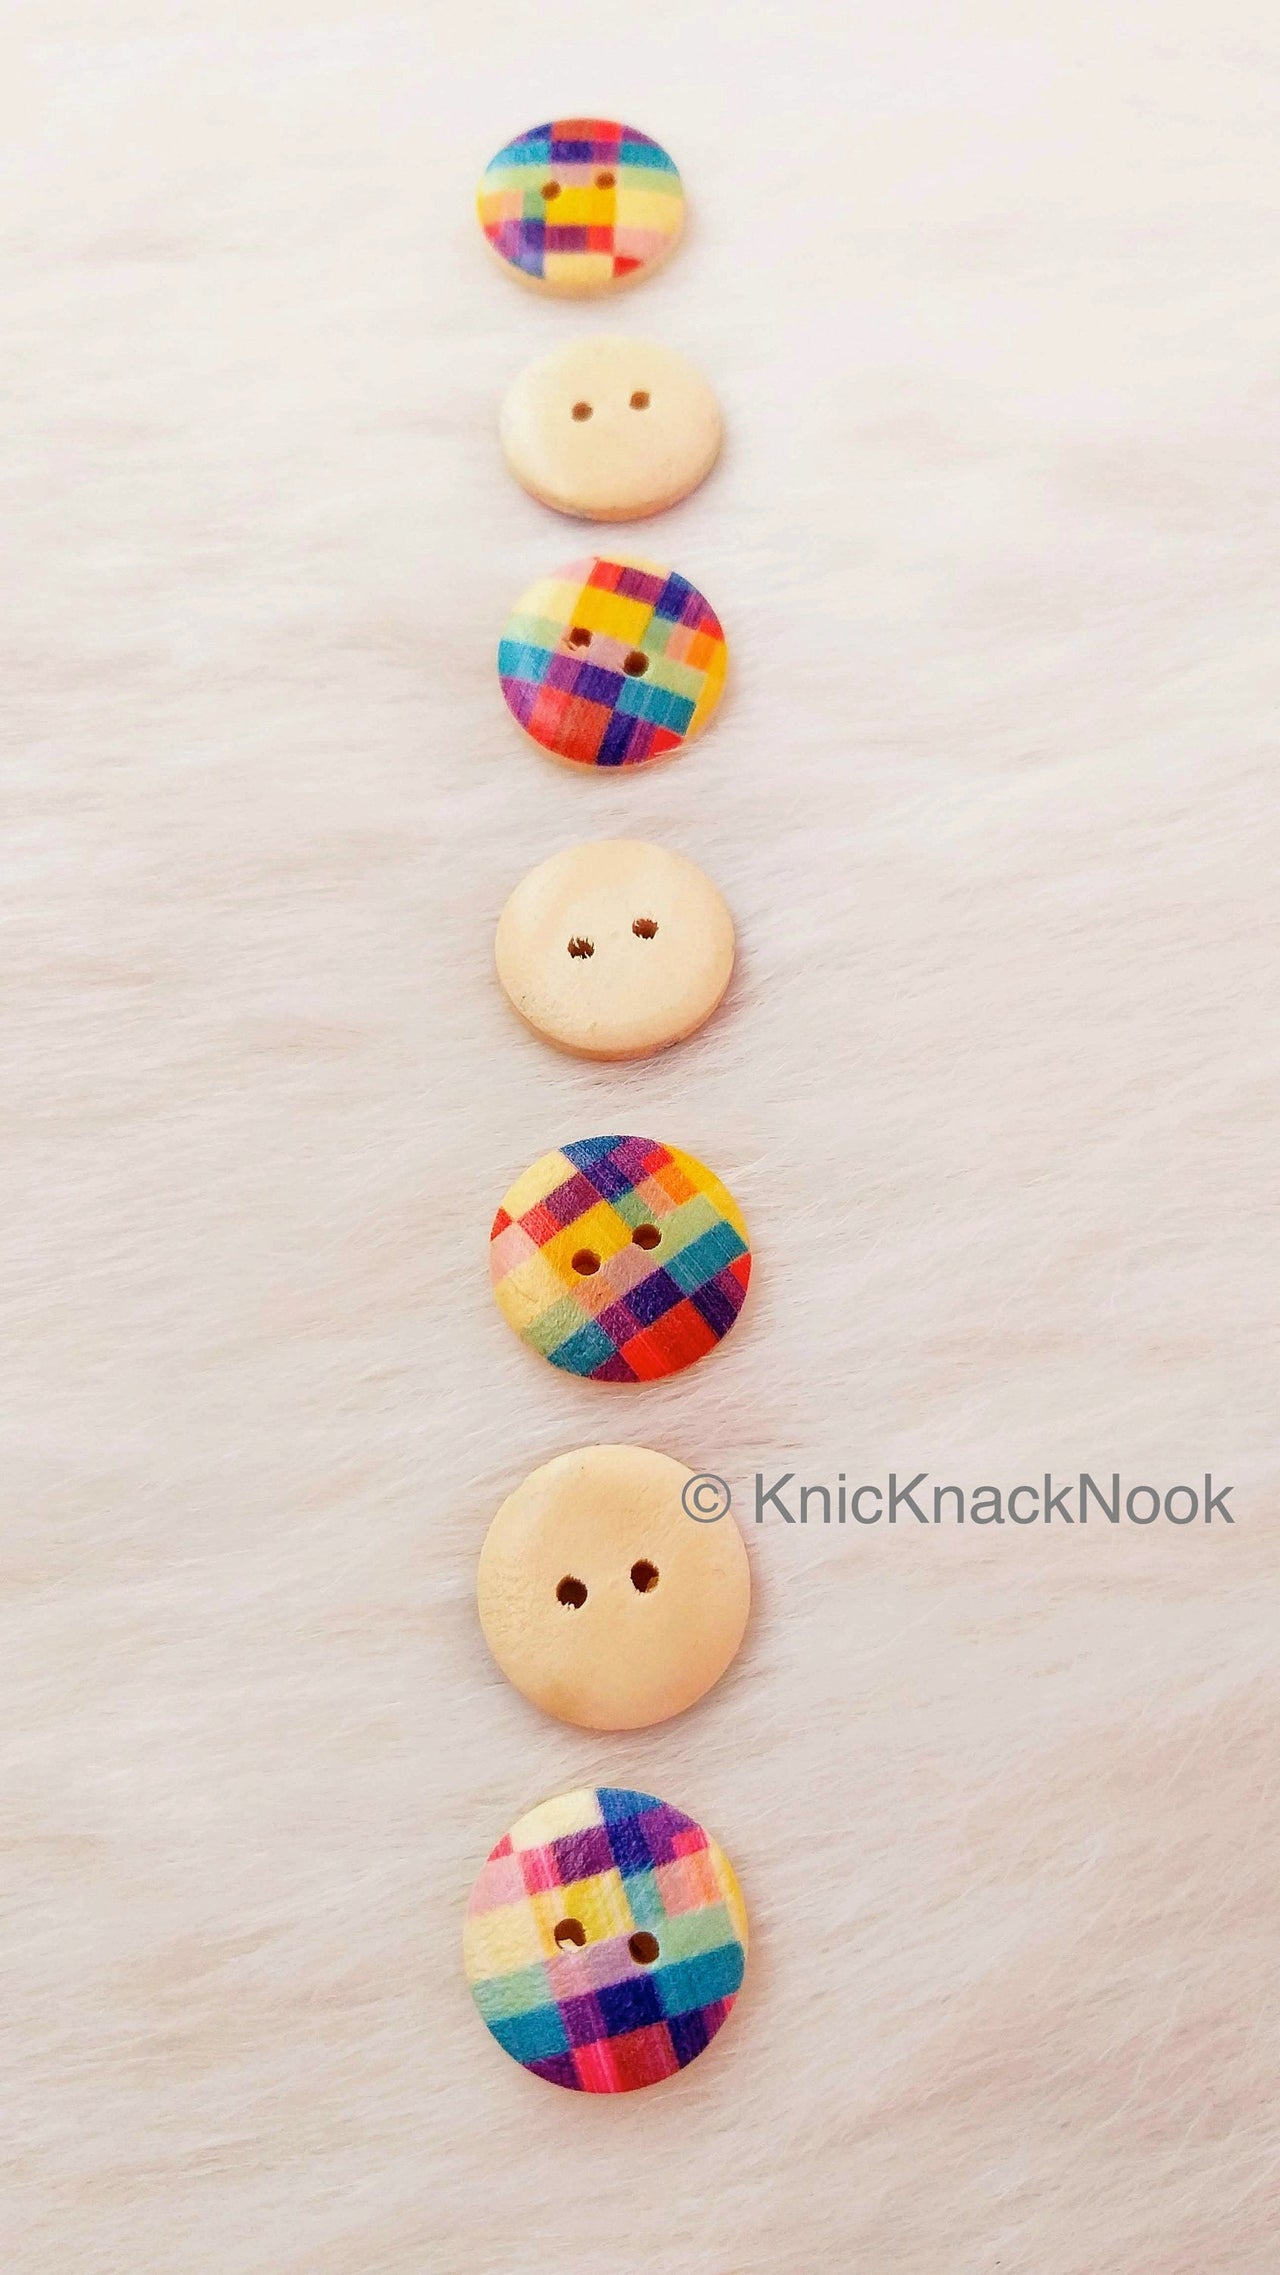 Chequered Print Multicoloured Round Wood Buttons